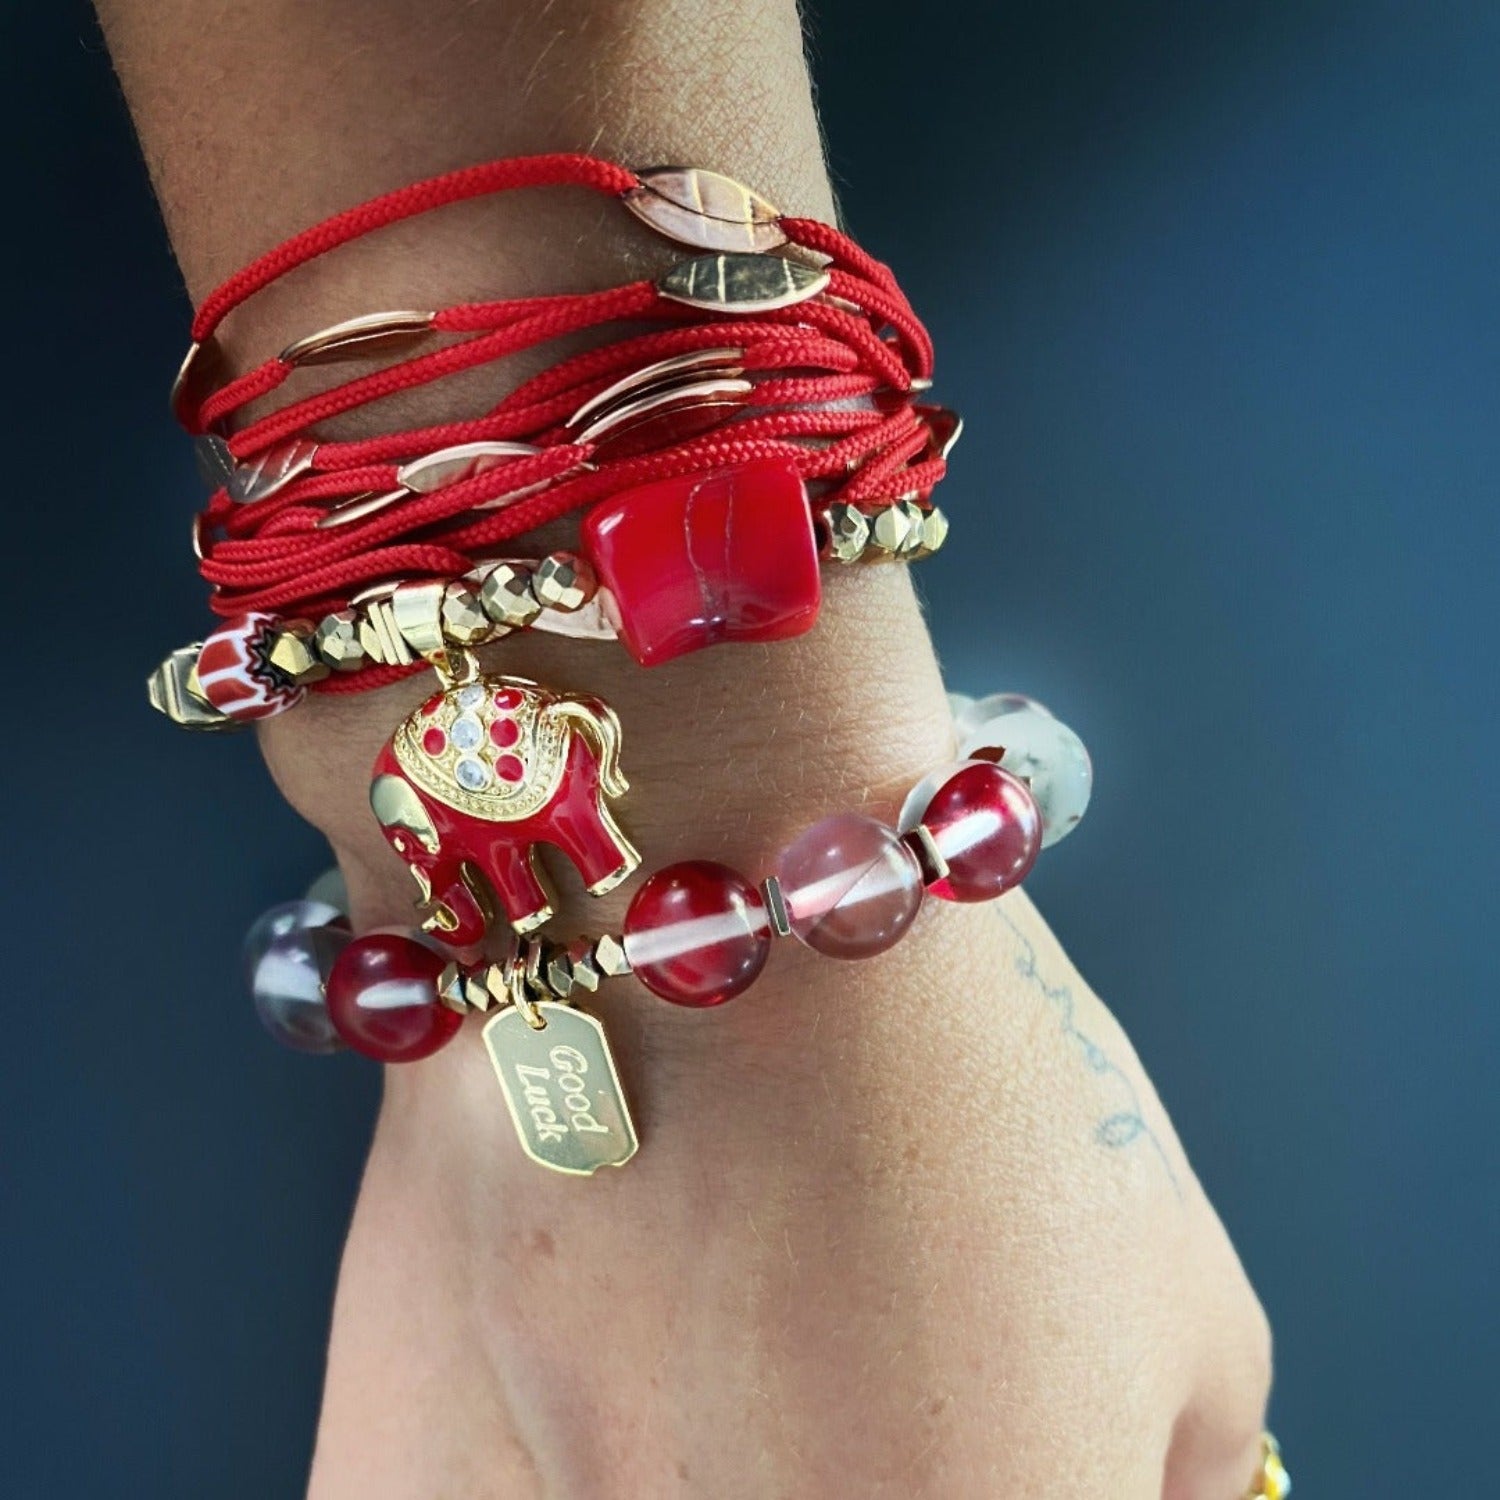 The model showcases the Red & Gold Good Luck Bracelet, radiating positivity and style with its vibrant colors and elegant design.